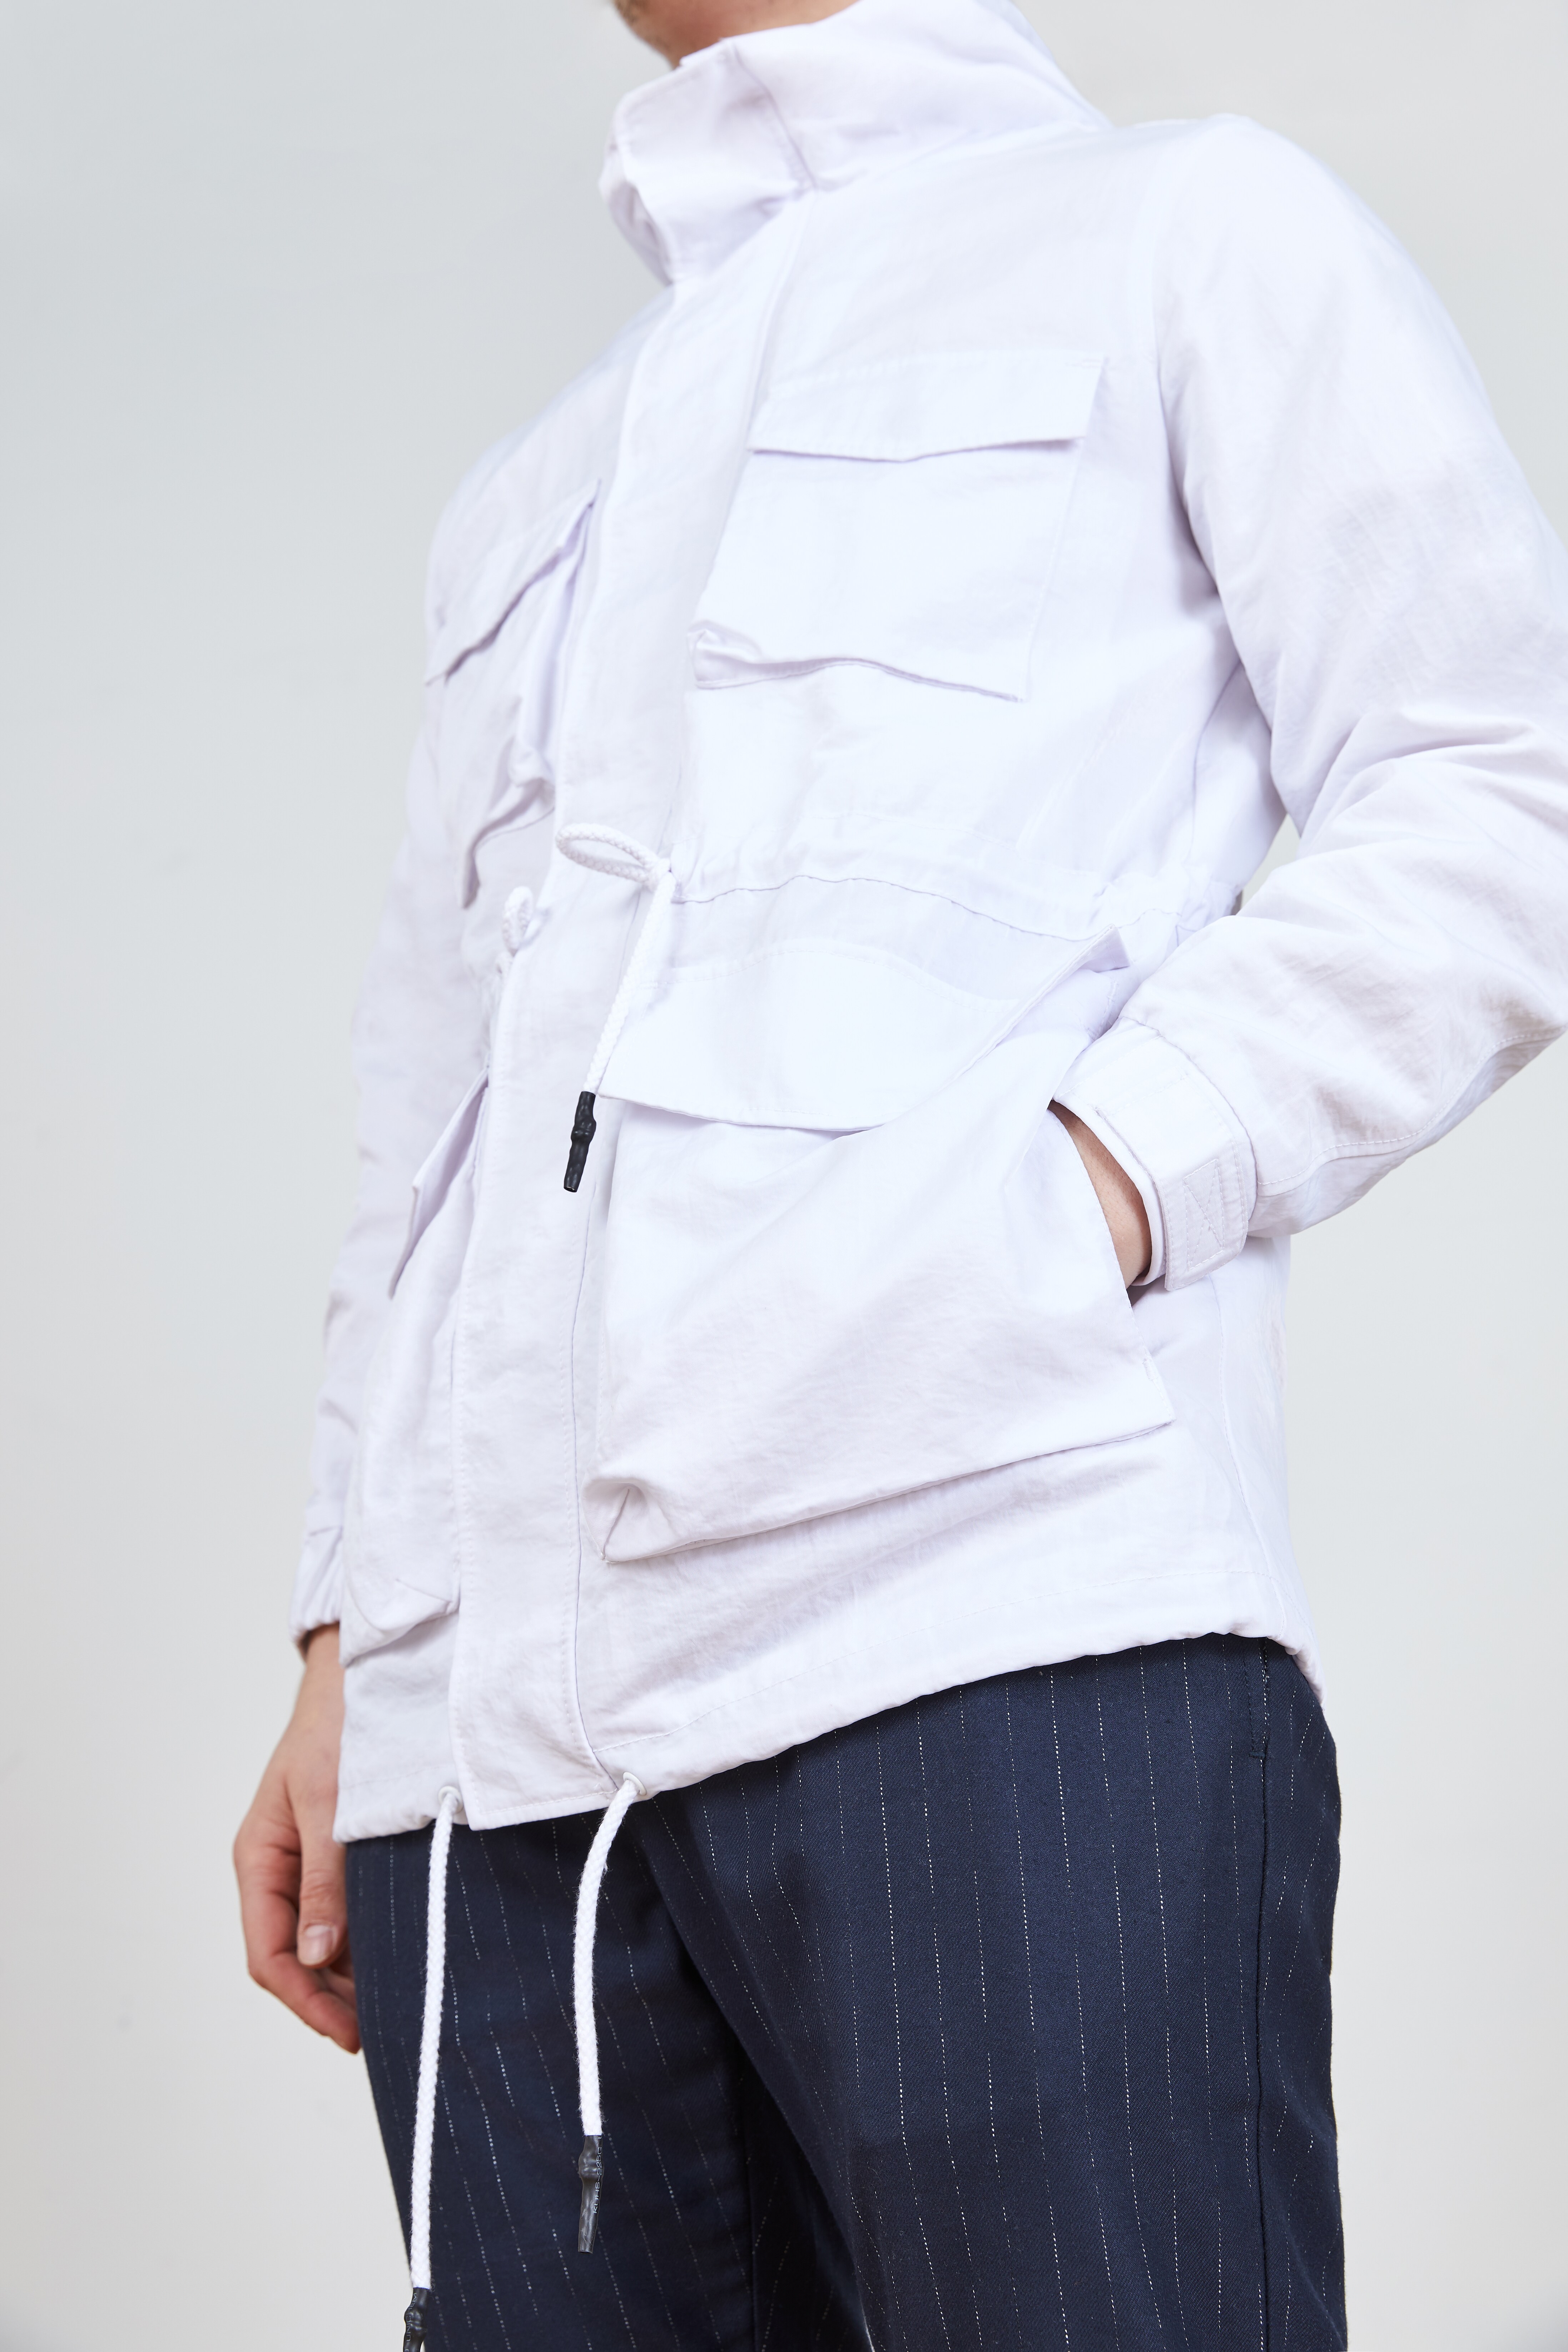 A close up picture of a white utility jacket. Available on ASOS.